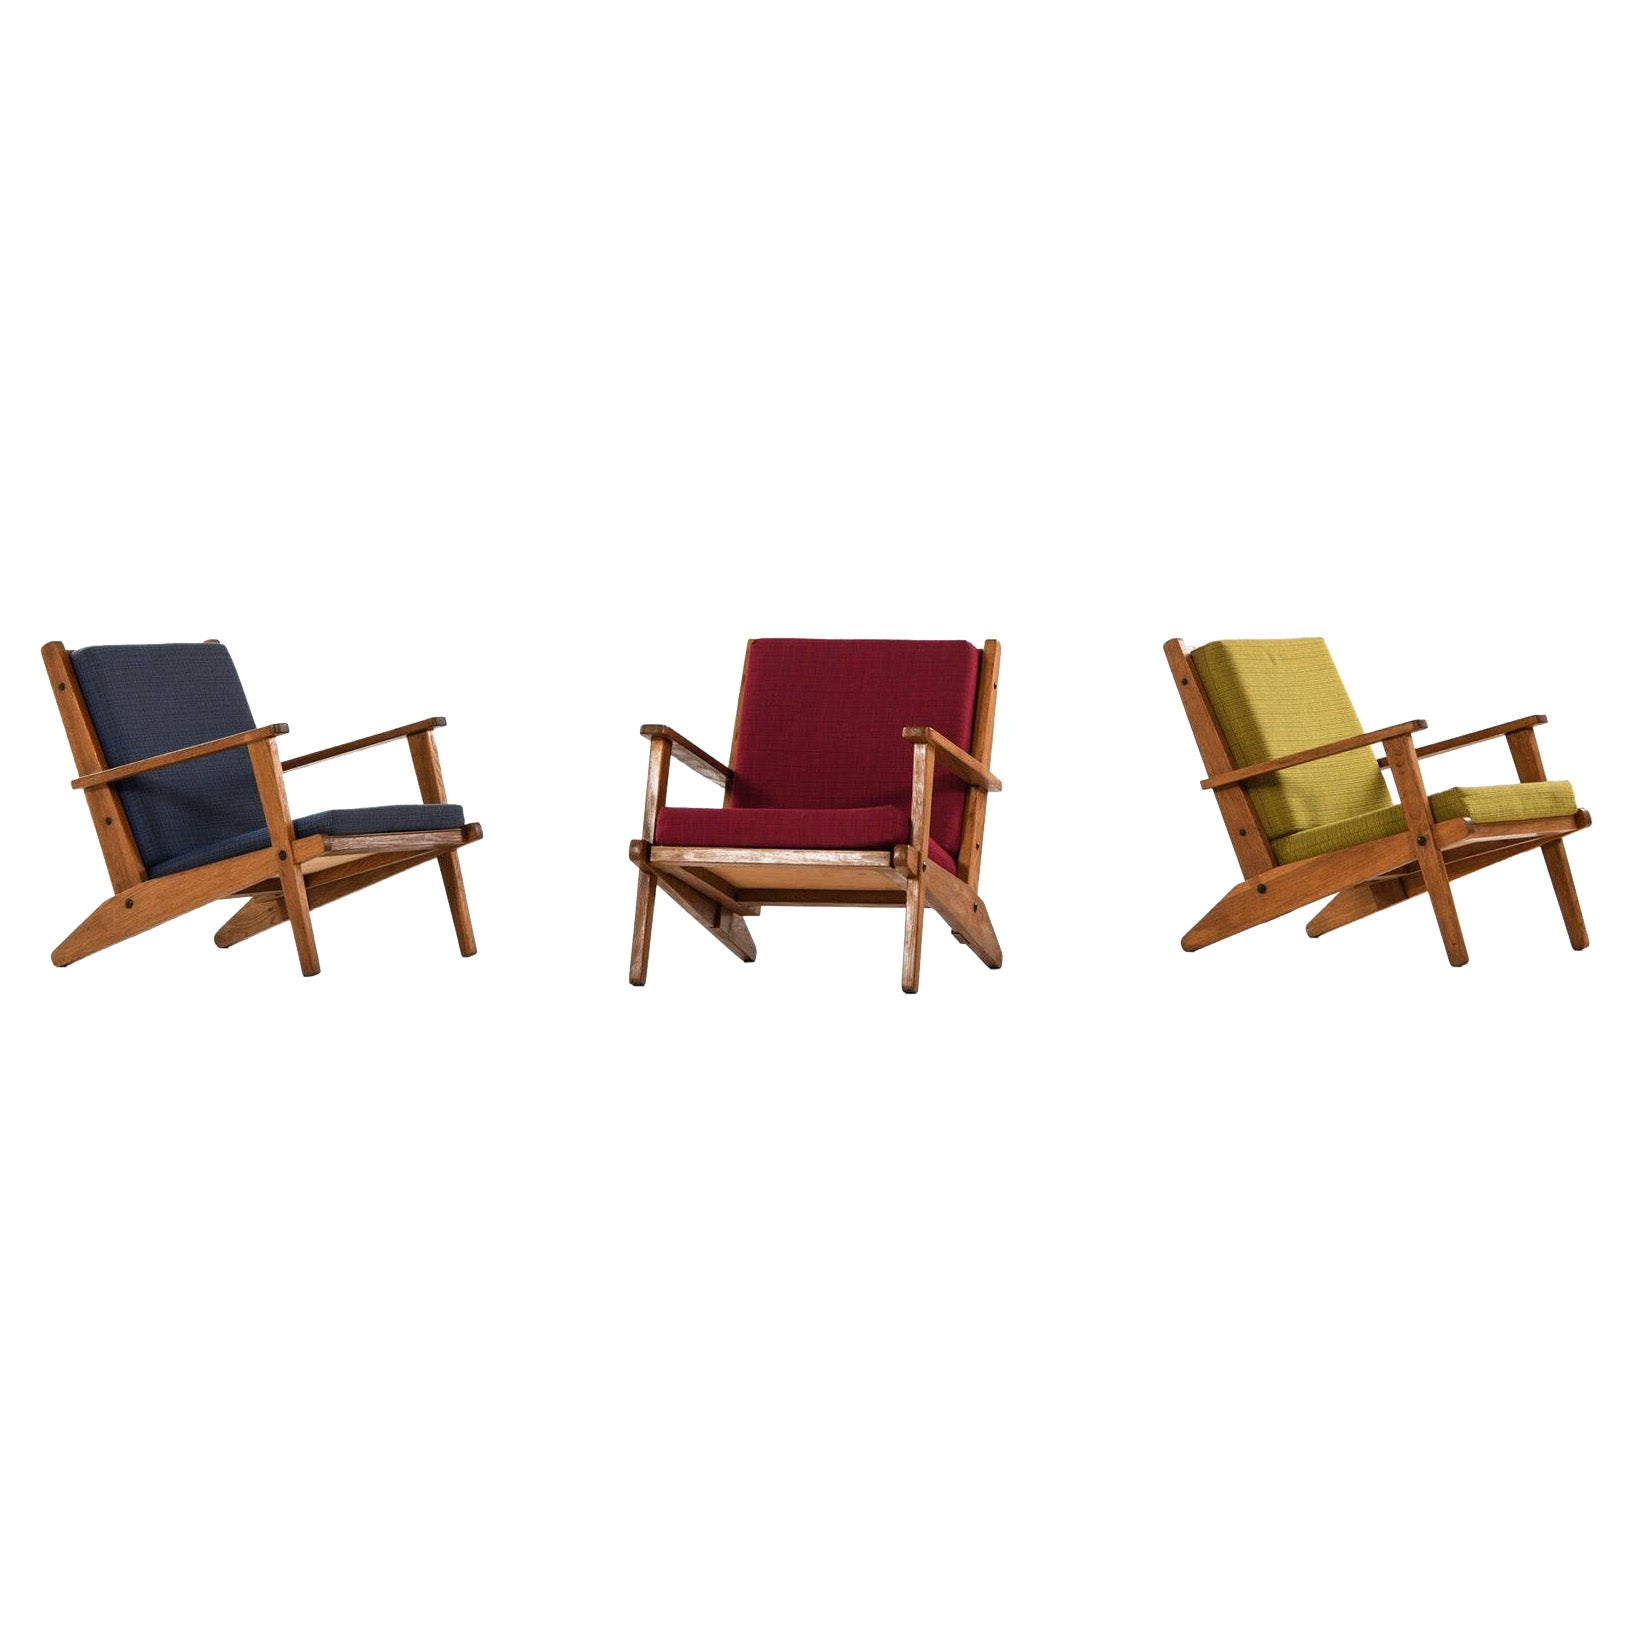 Poul Hansen Easy Chairs Produced in Denmark